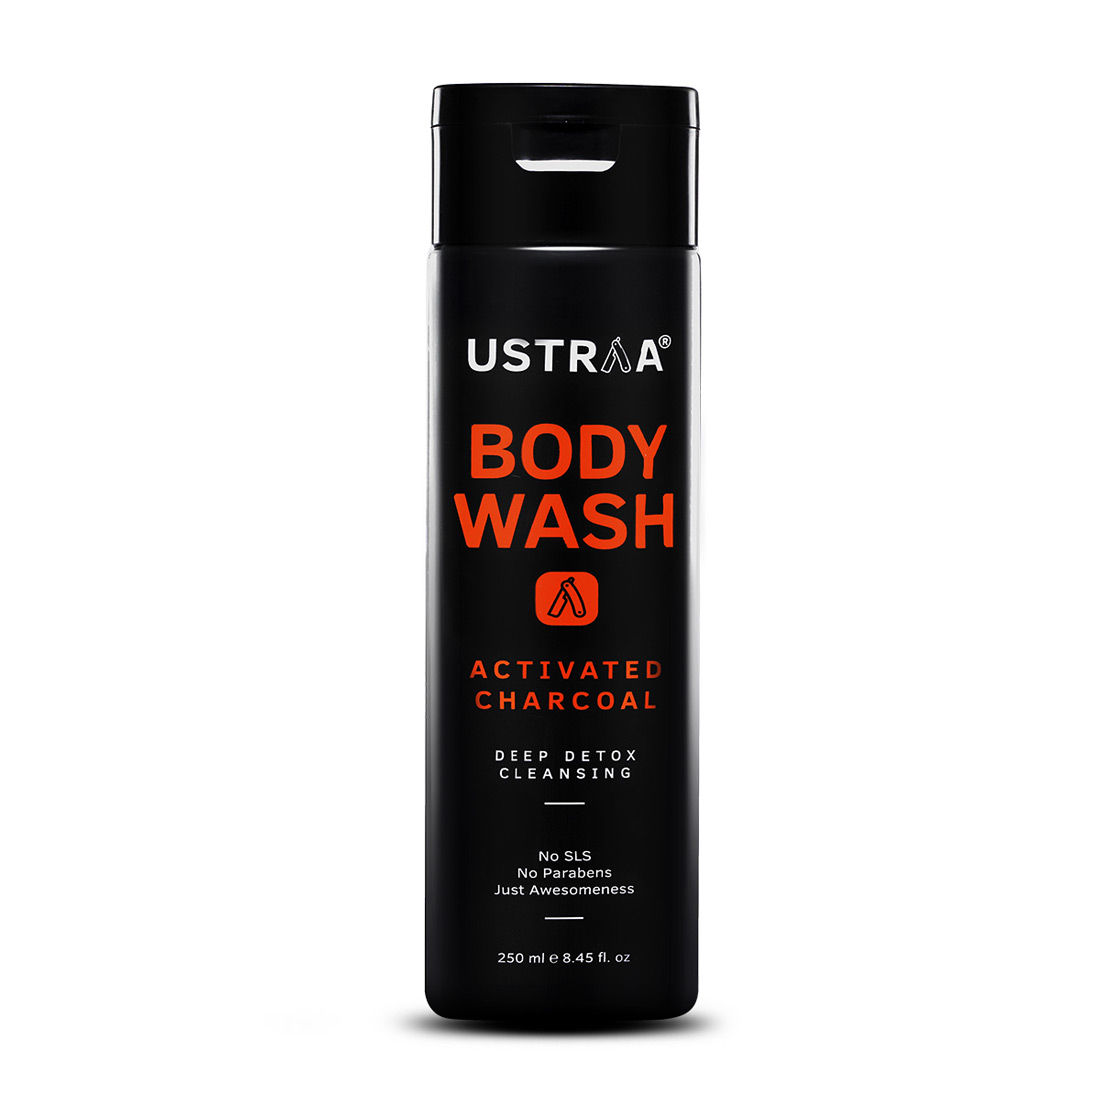 Ustraa Activated Charcoal Body Wash For Deep Detox Cleansing